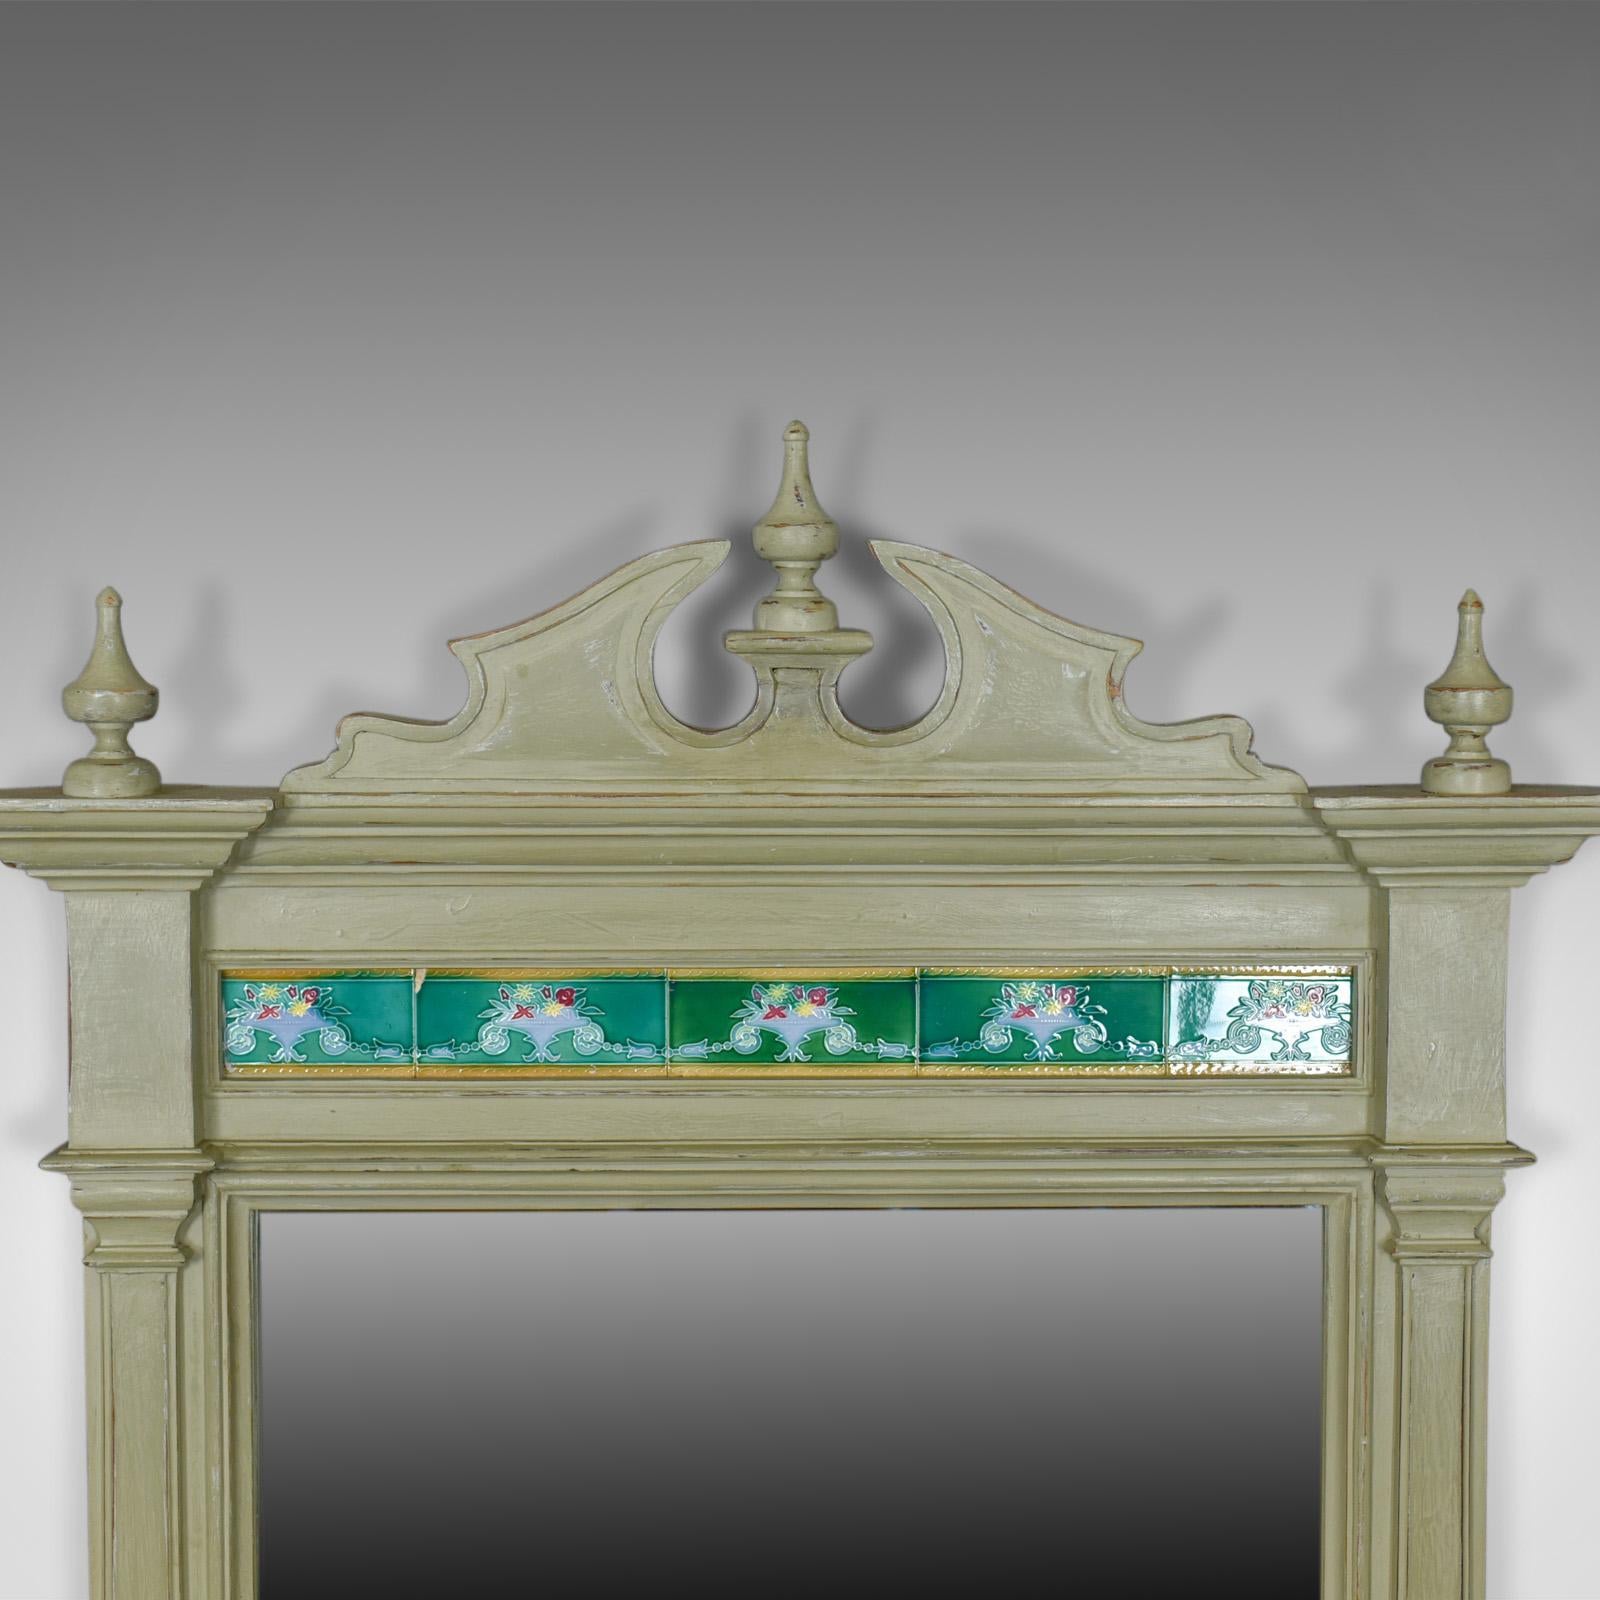 English Large Painted Antique Wall Mirror, Victorian, Overmantel Pier, Tiles, circa 1890 For Sale